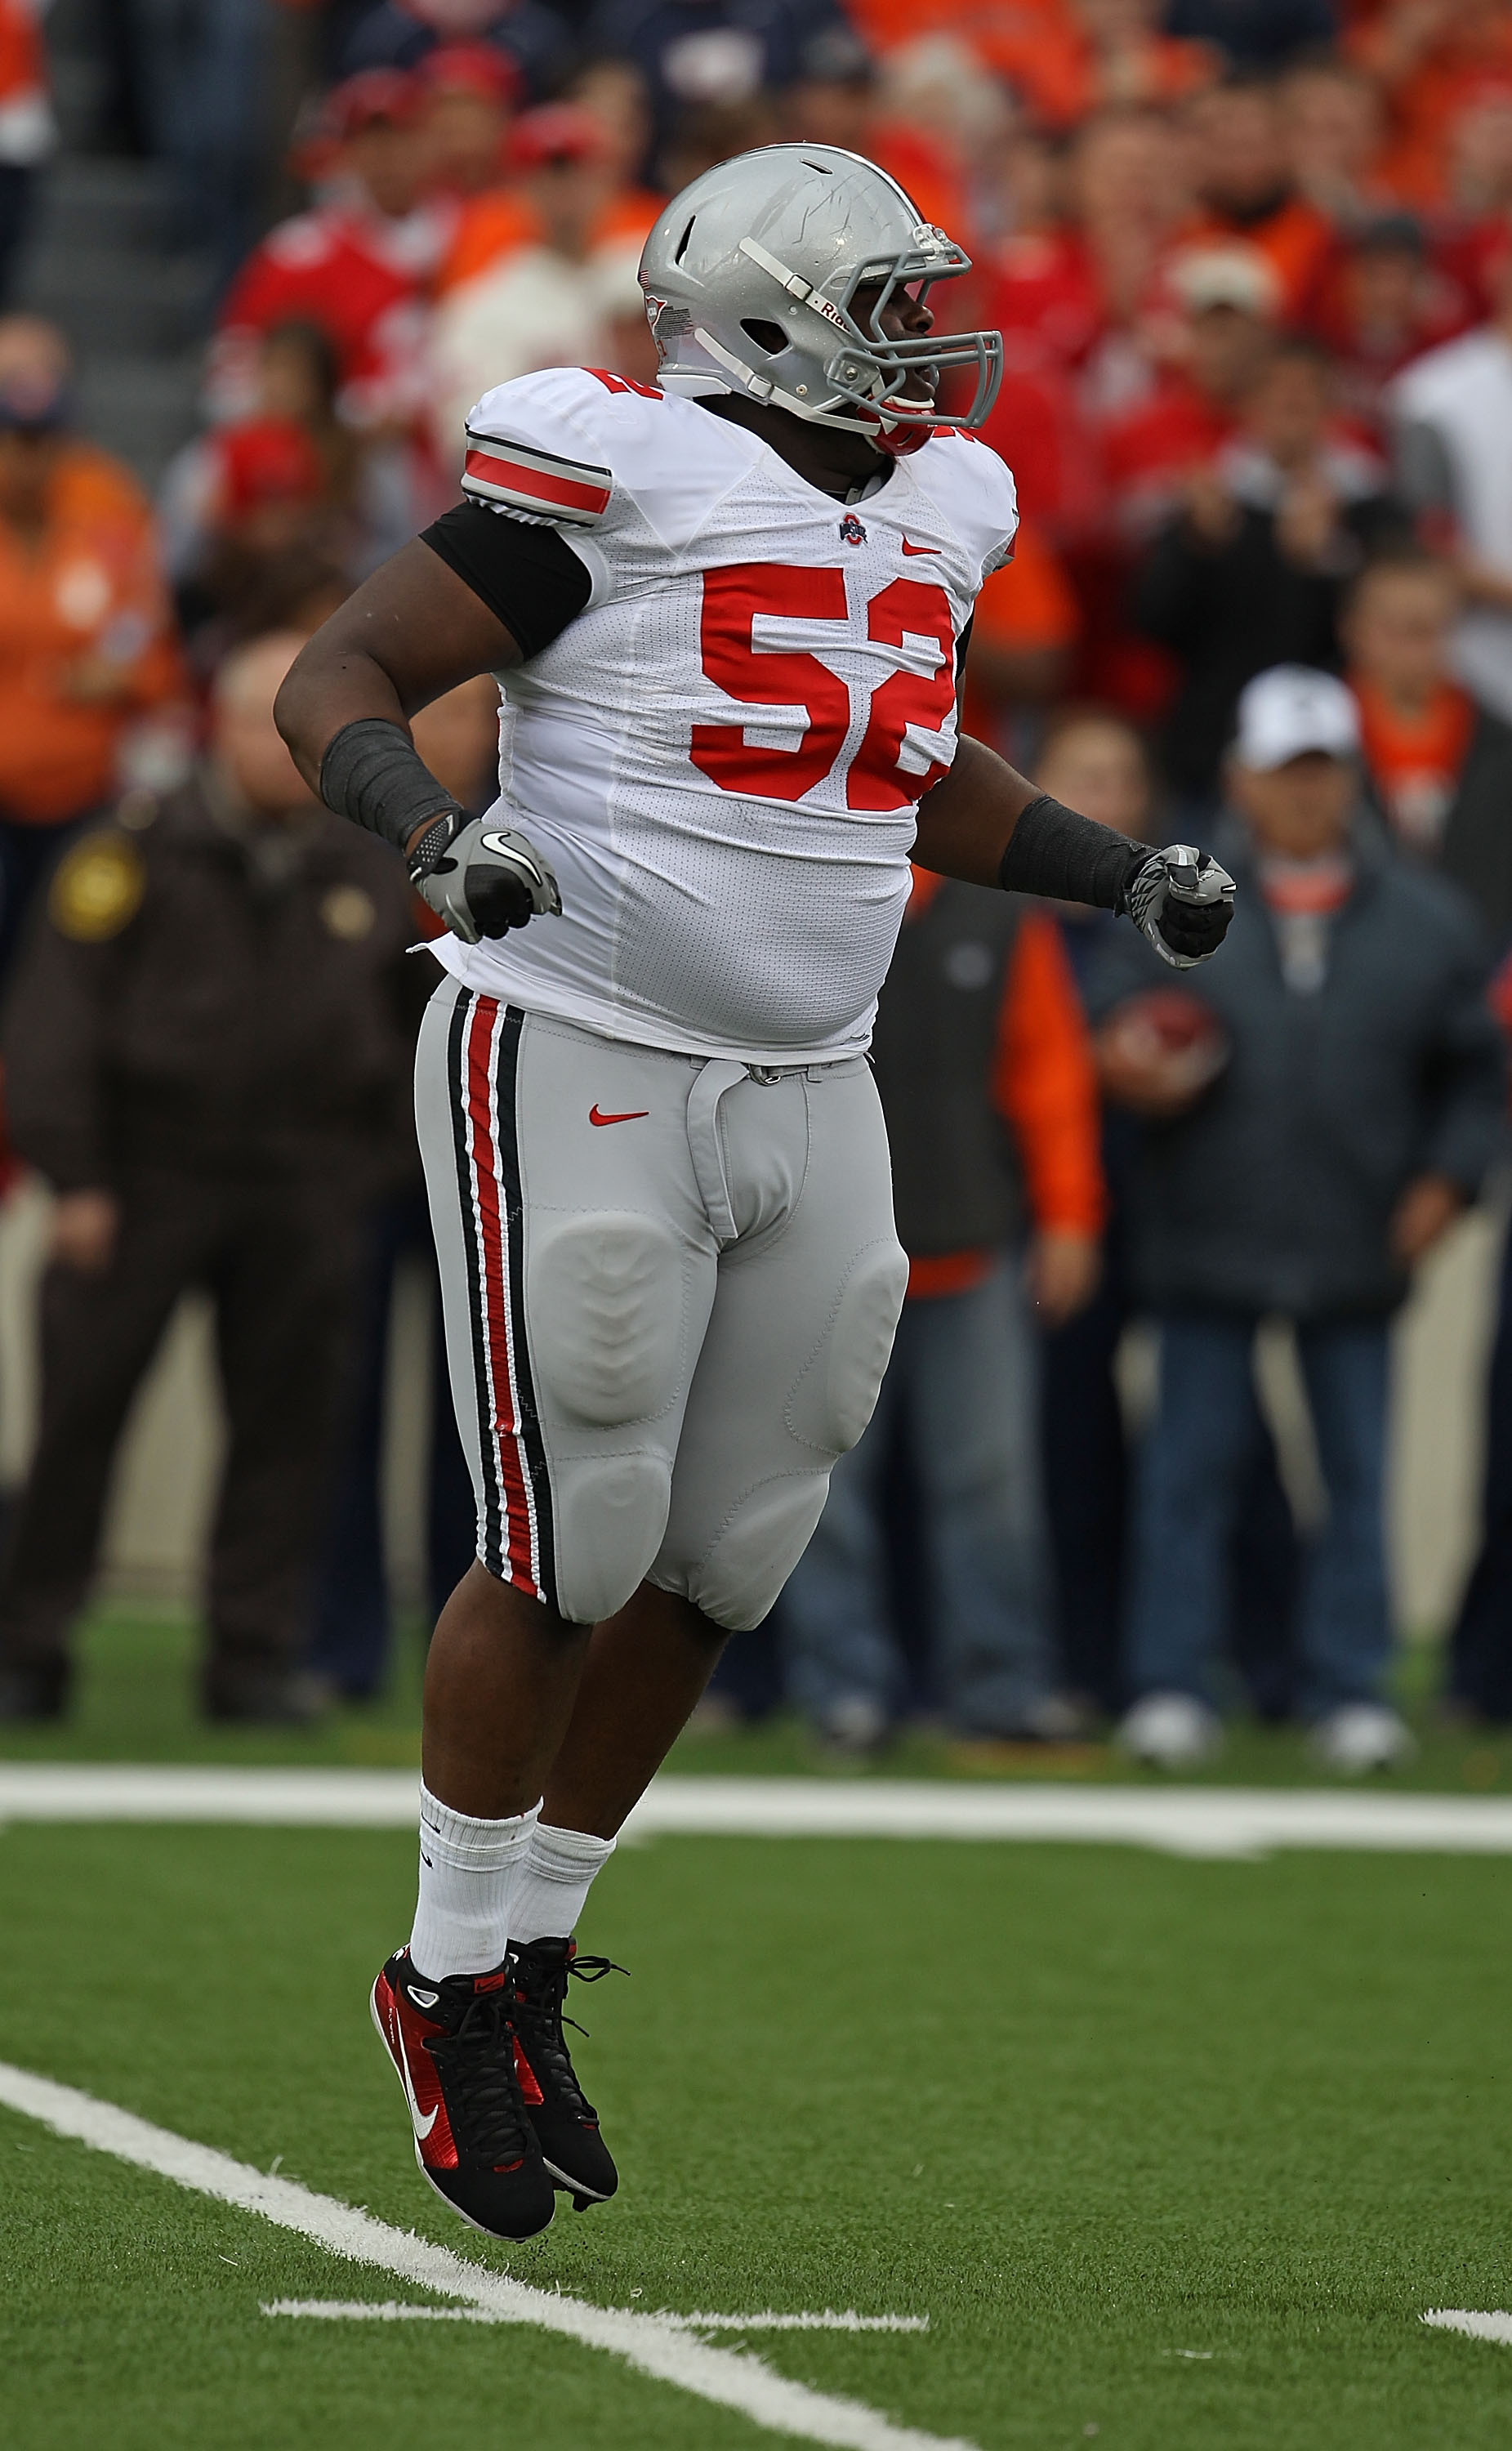 CHAMPAIGN, IL - OCTOBER 02: Johnathan Hankins #52 of the Ohio State Buckeyes hops in celebration after a defensive play against the Illinois Fighting Illini at Memorial Stadium on October 2, 2010 in Champaign, Illinois. Ohio State defeated Illinois 24-13.